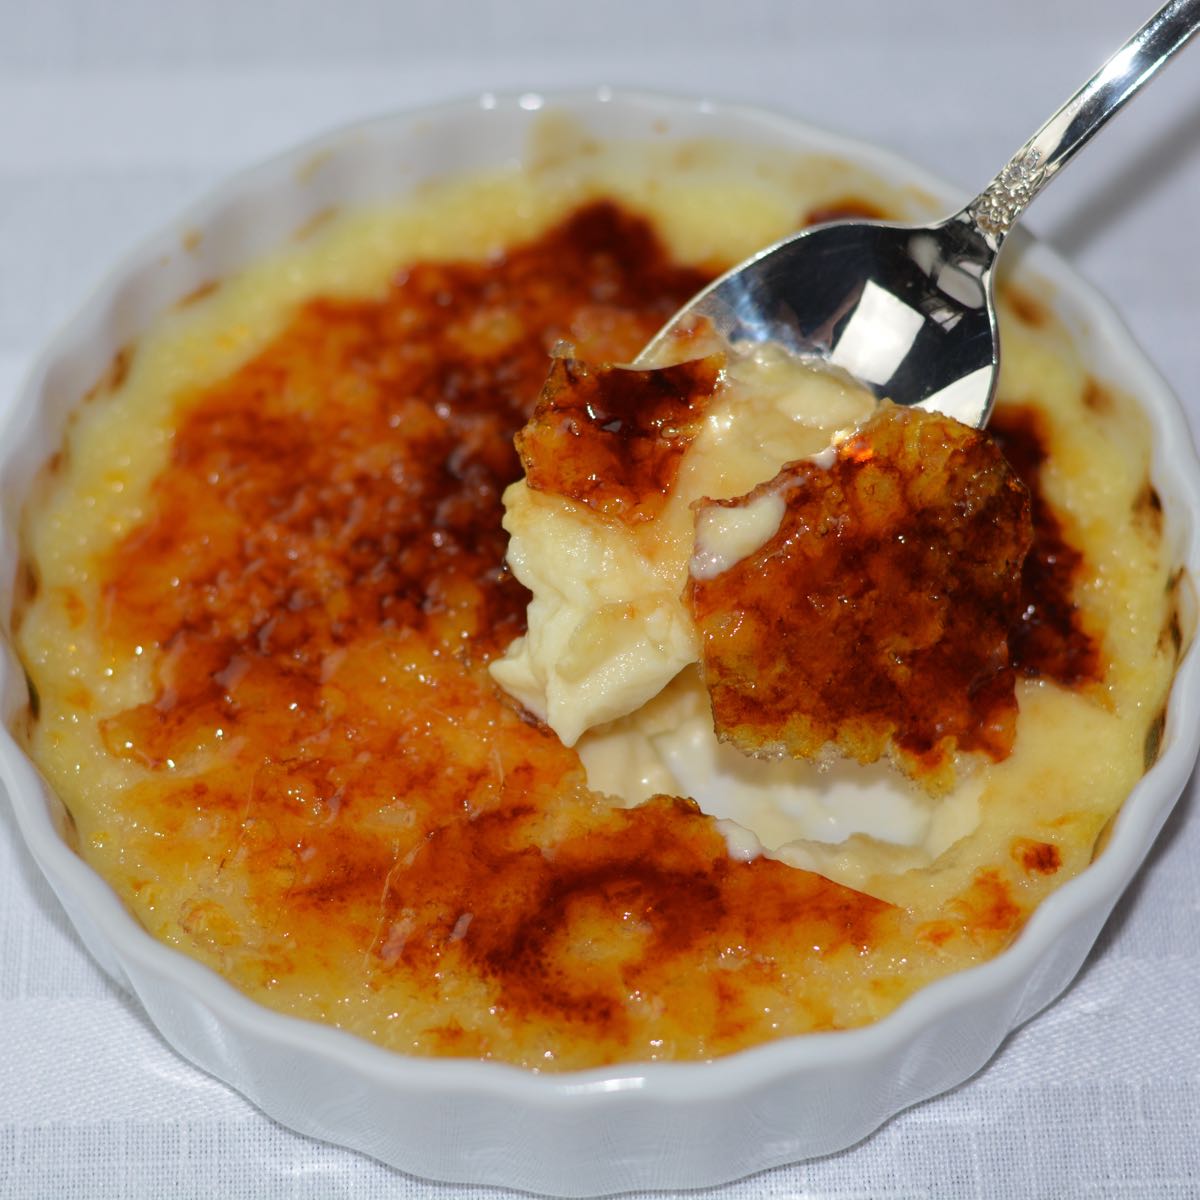 A spoonful of Creme Brulee being lifted out of a ramekin dish.